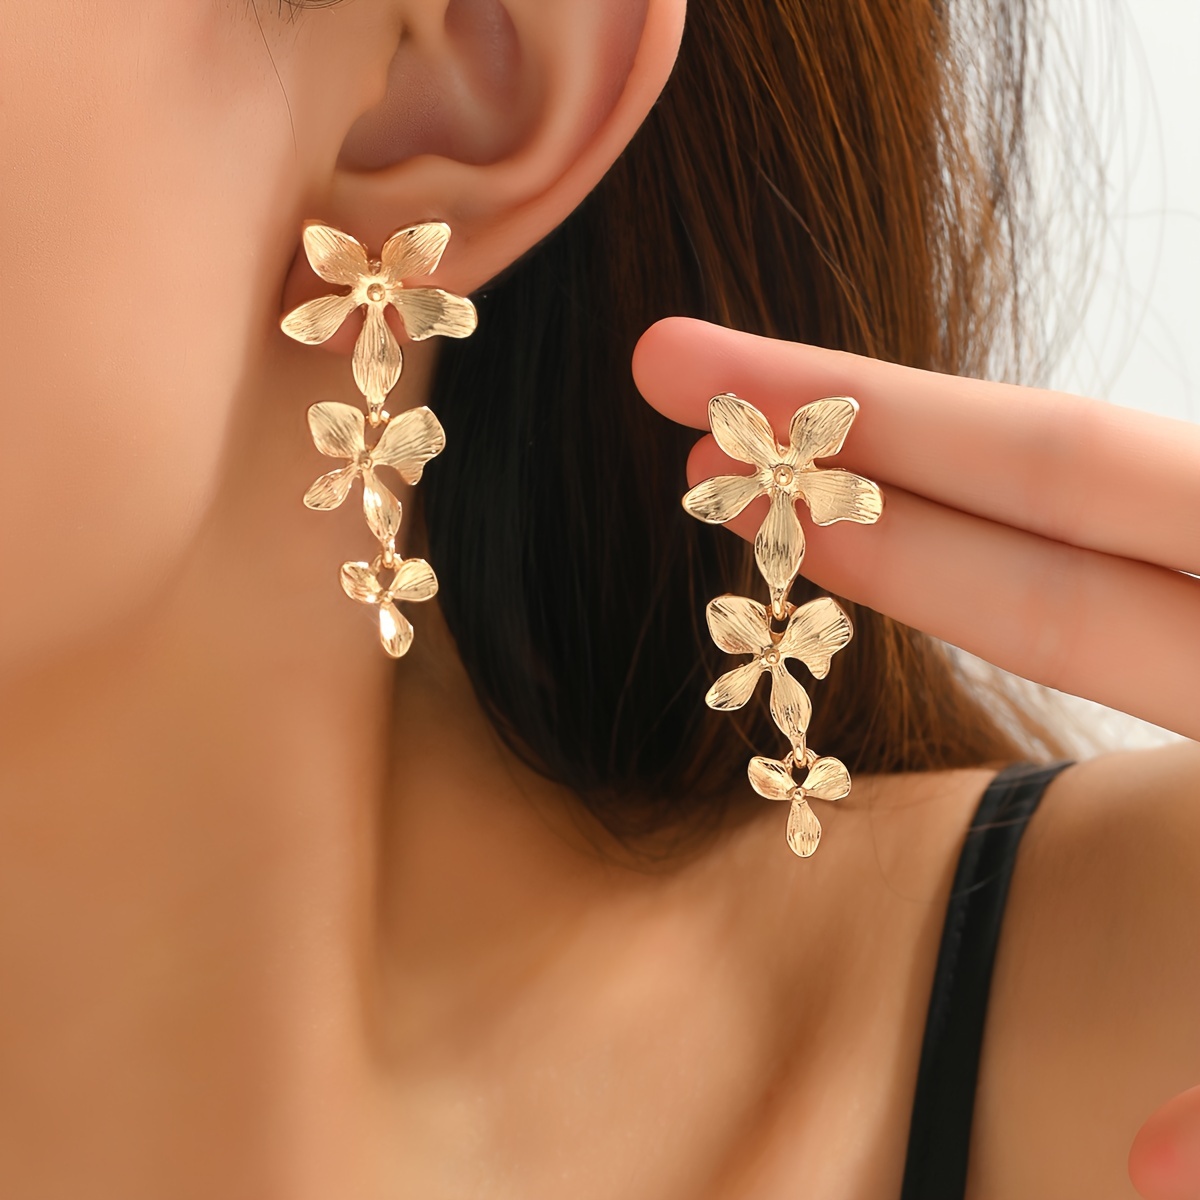 

Elegant Dangle Earrings Golden Flower Design Symbol Of Beauty And Fashion Match Daily Outfits Party Accessories Dupes Luxury Jewelry